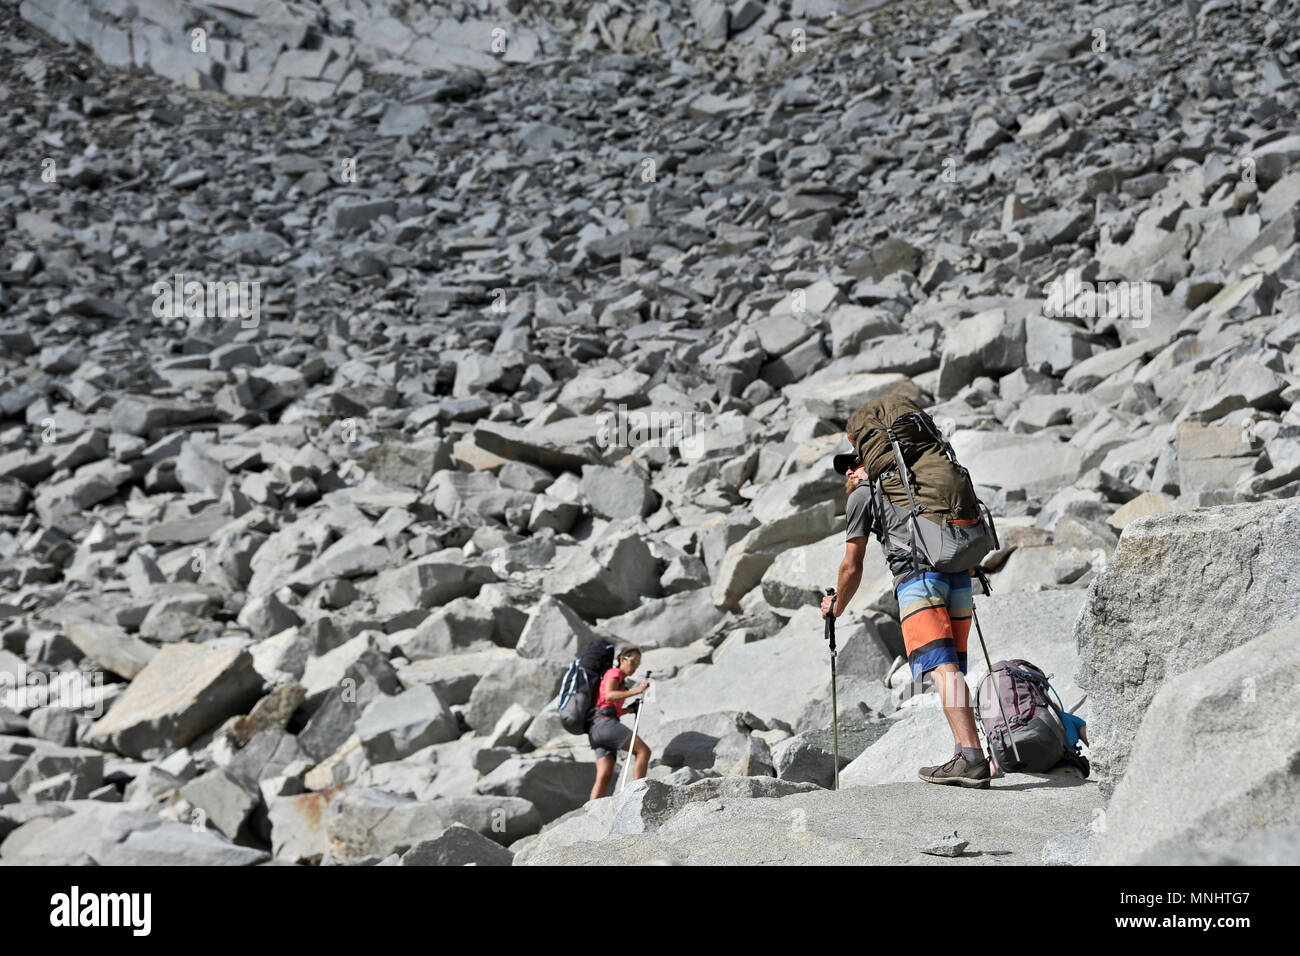 Backpackers climb through steep talus to Frozen Lake Pass on a two-week trek of the Sierra High Route in Kings Canyon National Park in California. The 200-mile route roughly parallels the popular John Muir Trail through the Sierra Nevada Range of California from Kings Canyon National Park to Yosemite National Park. Stock Photo